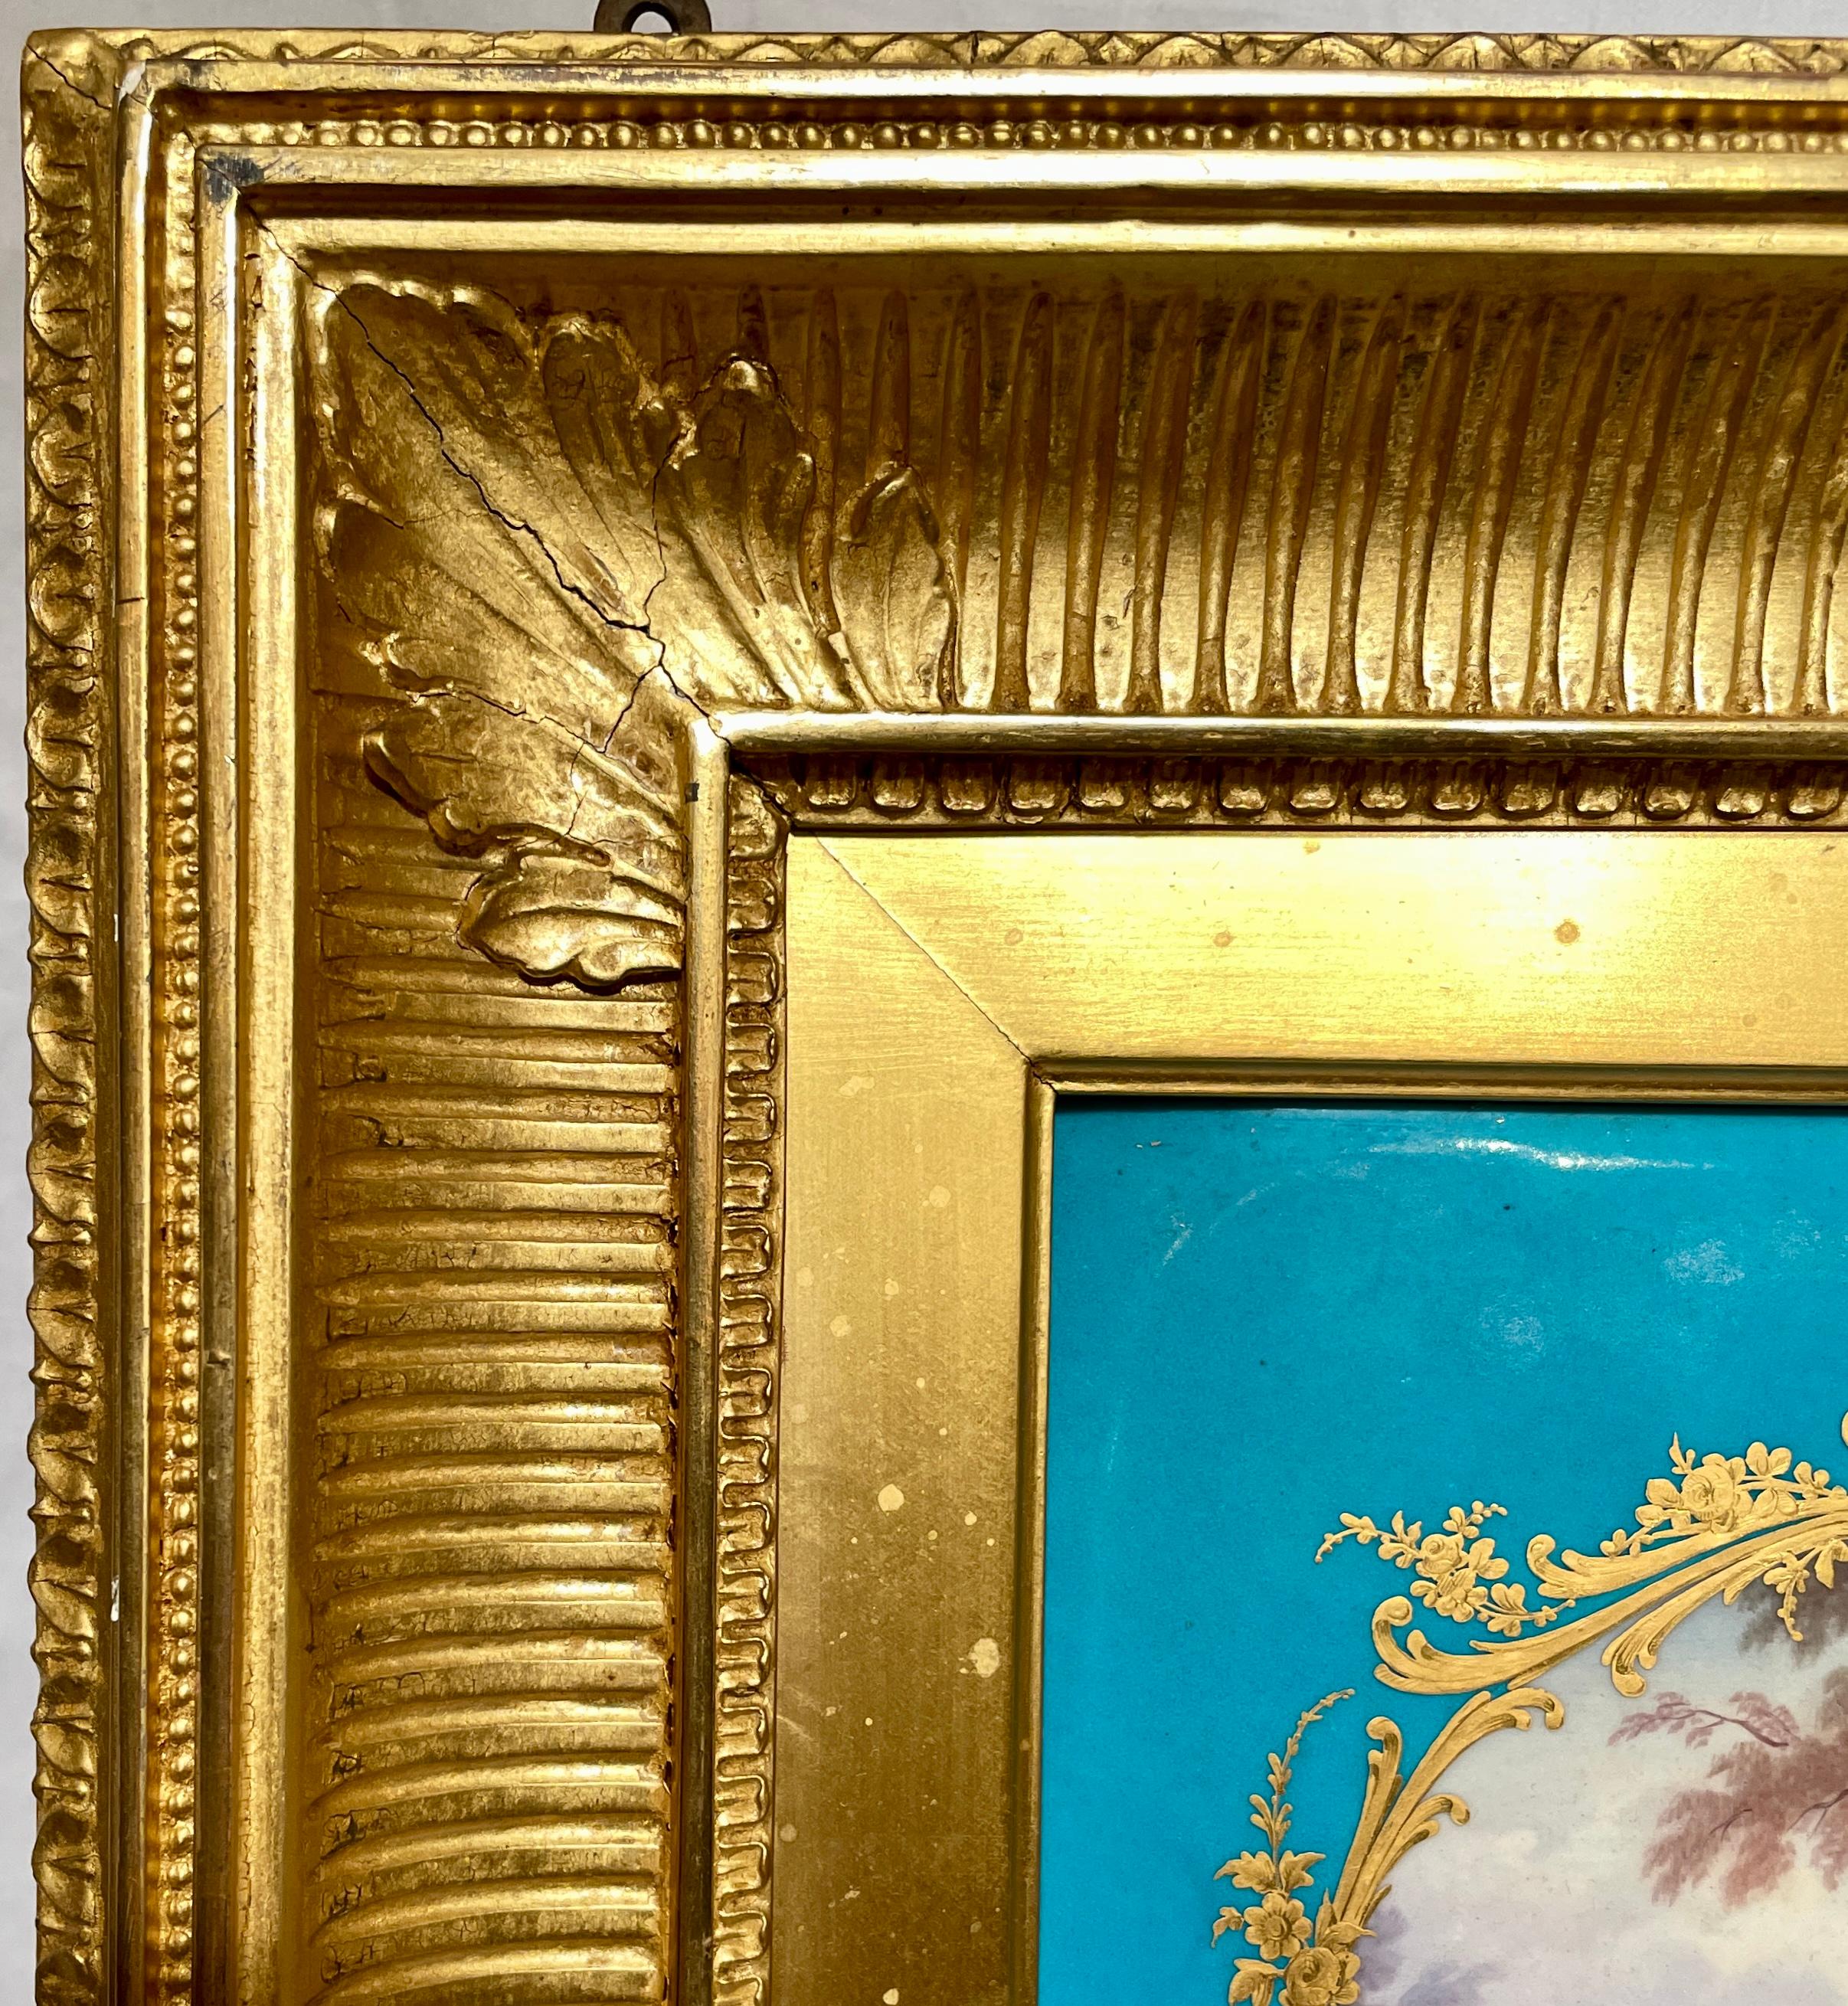 Antique French hand-painted blue and gold Sèvres Porcelain plaque in frame, Circa 1890.